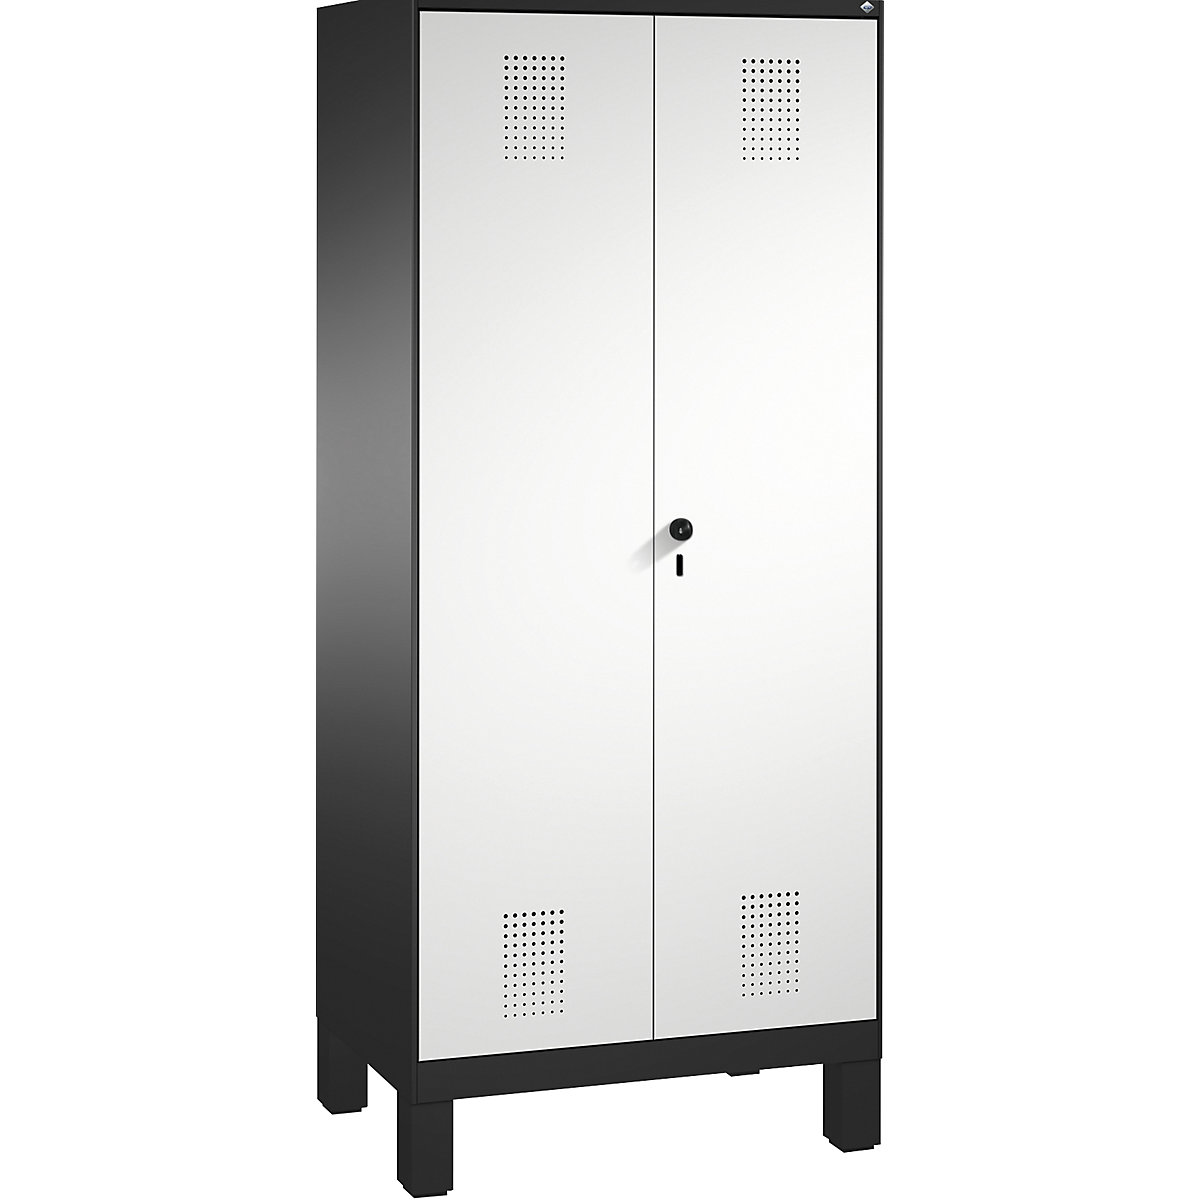 EVOLO storage cupboard, doors close in the middle, with feet – C+P, 2 compartments, 8 shelves, compartment width 400 mm, black grey / light grey-6